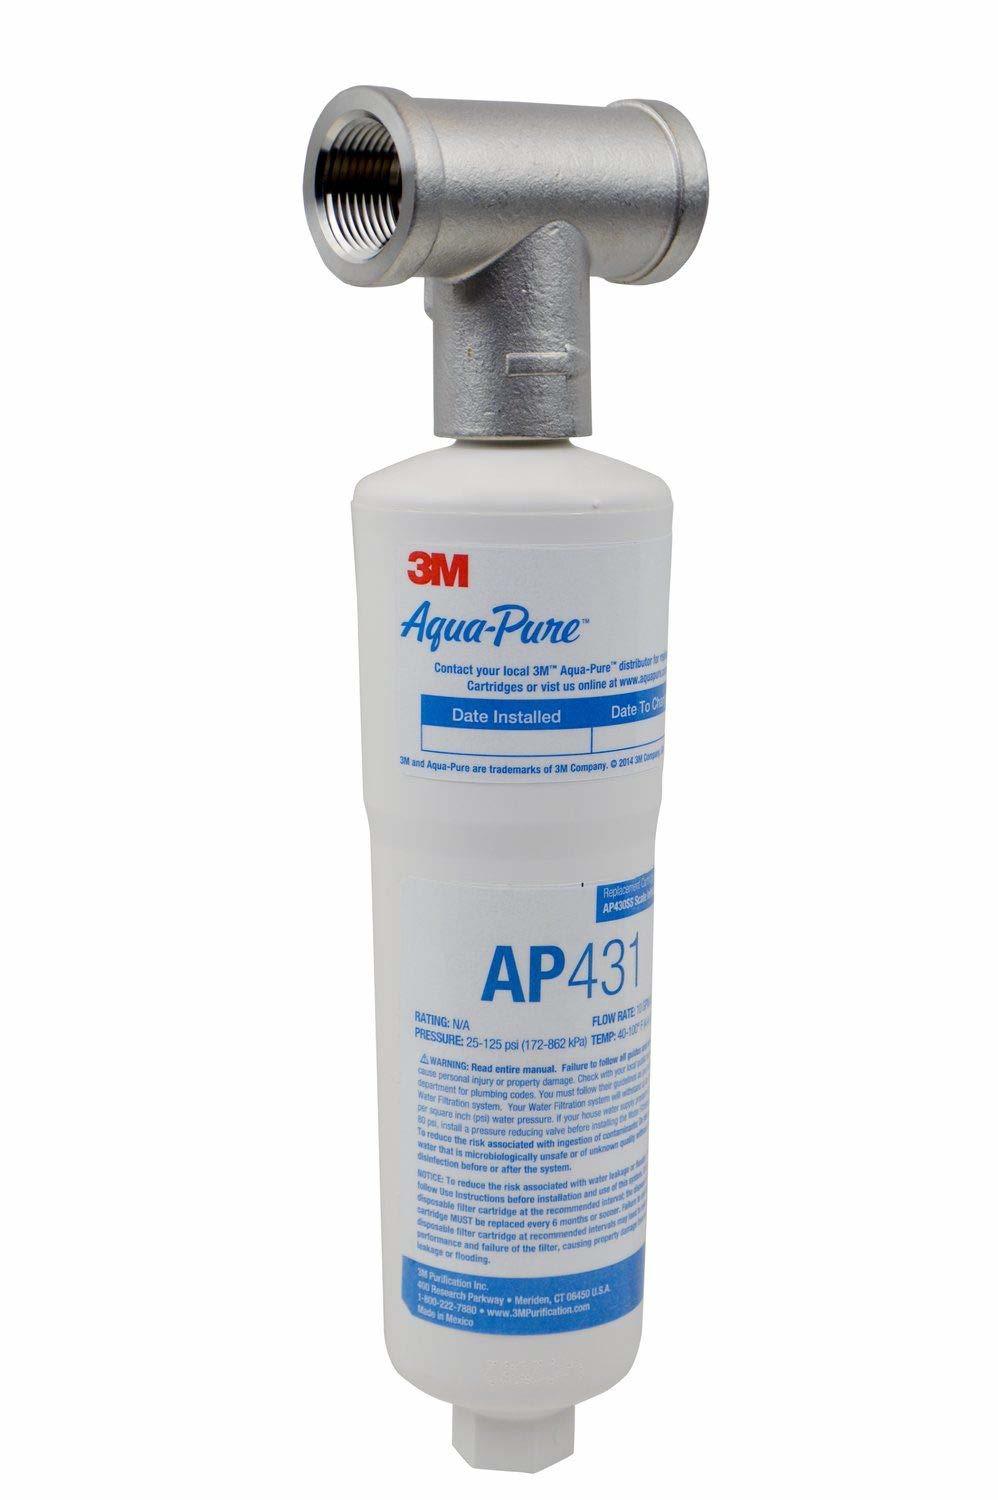 Scale Buildup On Hot Water Heaters And Boilers Is Prevented By The 3M Aqua-Pure - $123.94